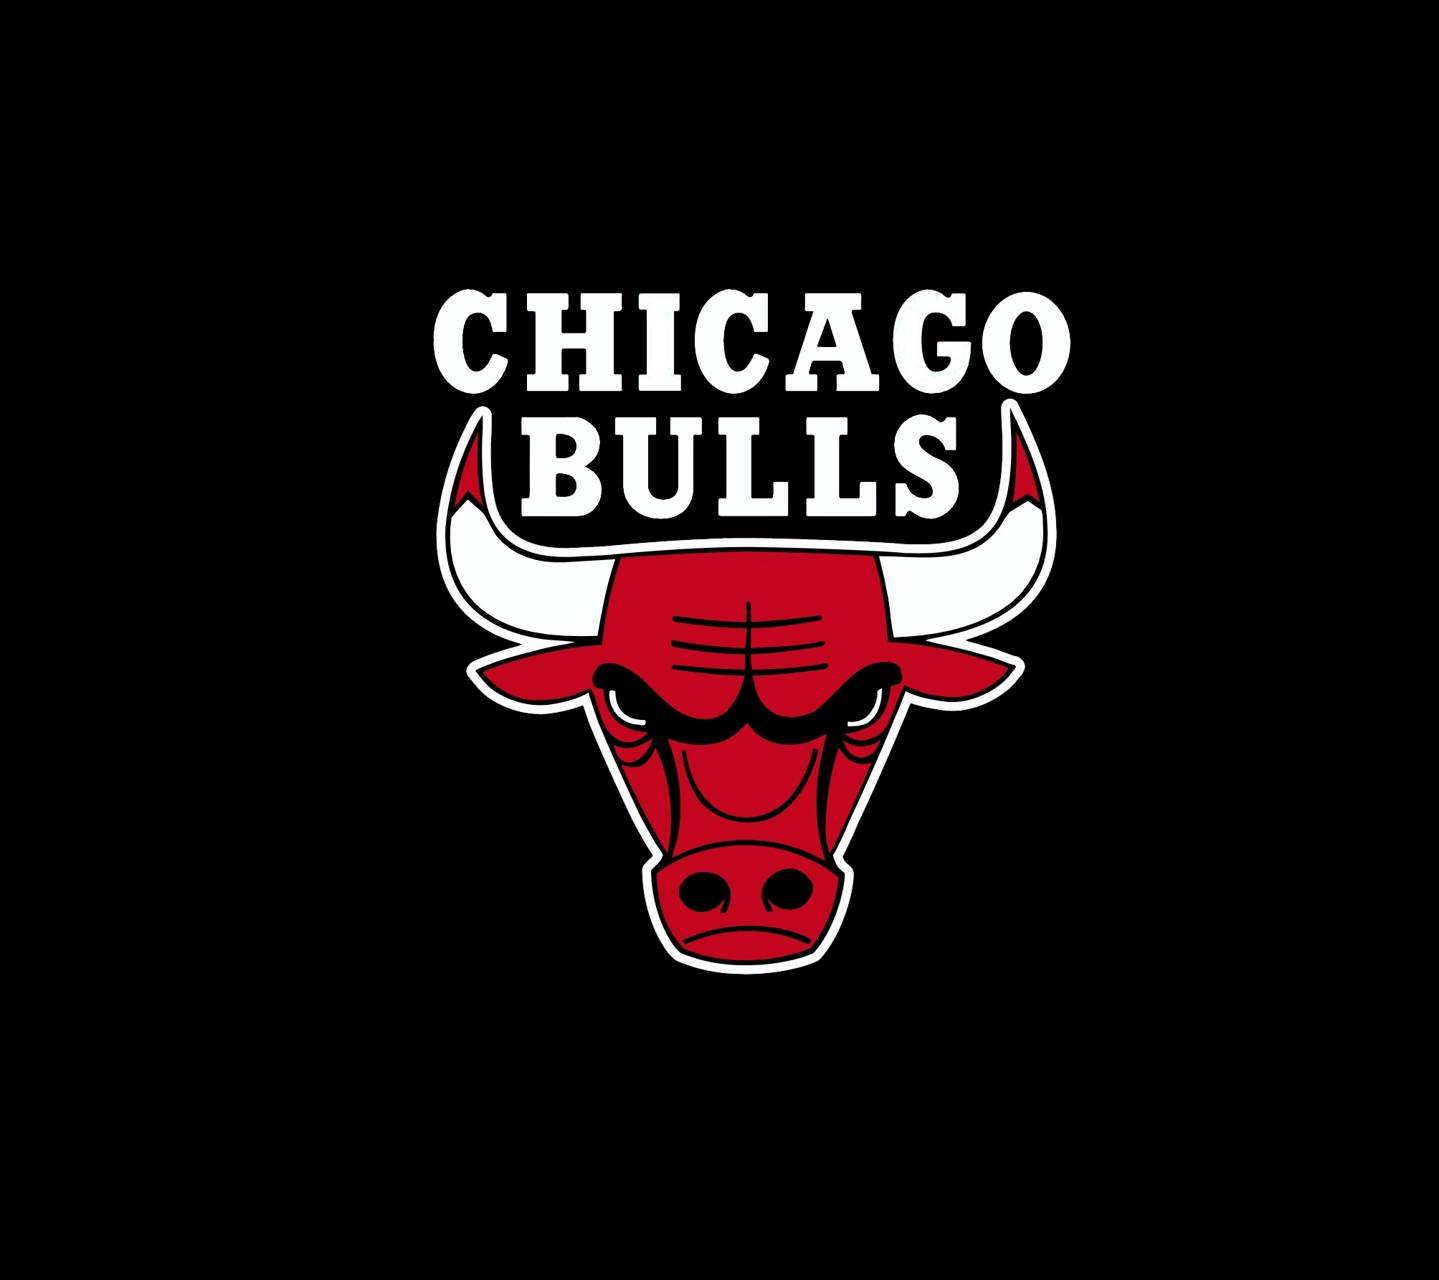 Download free chicago bulls wallpaper for your mobile phone